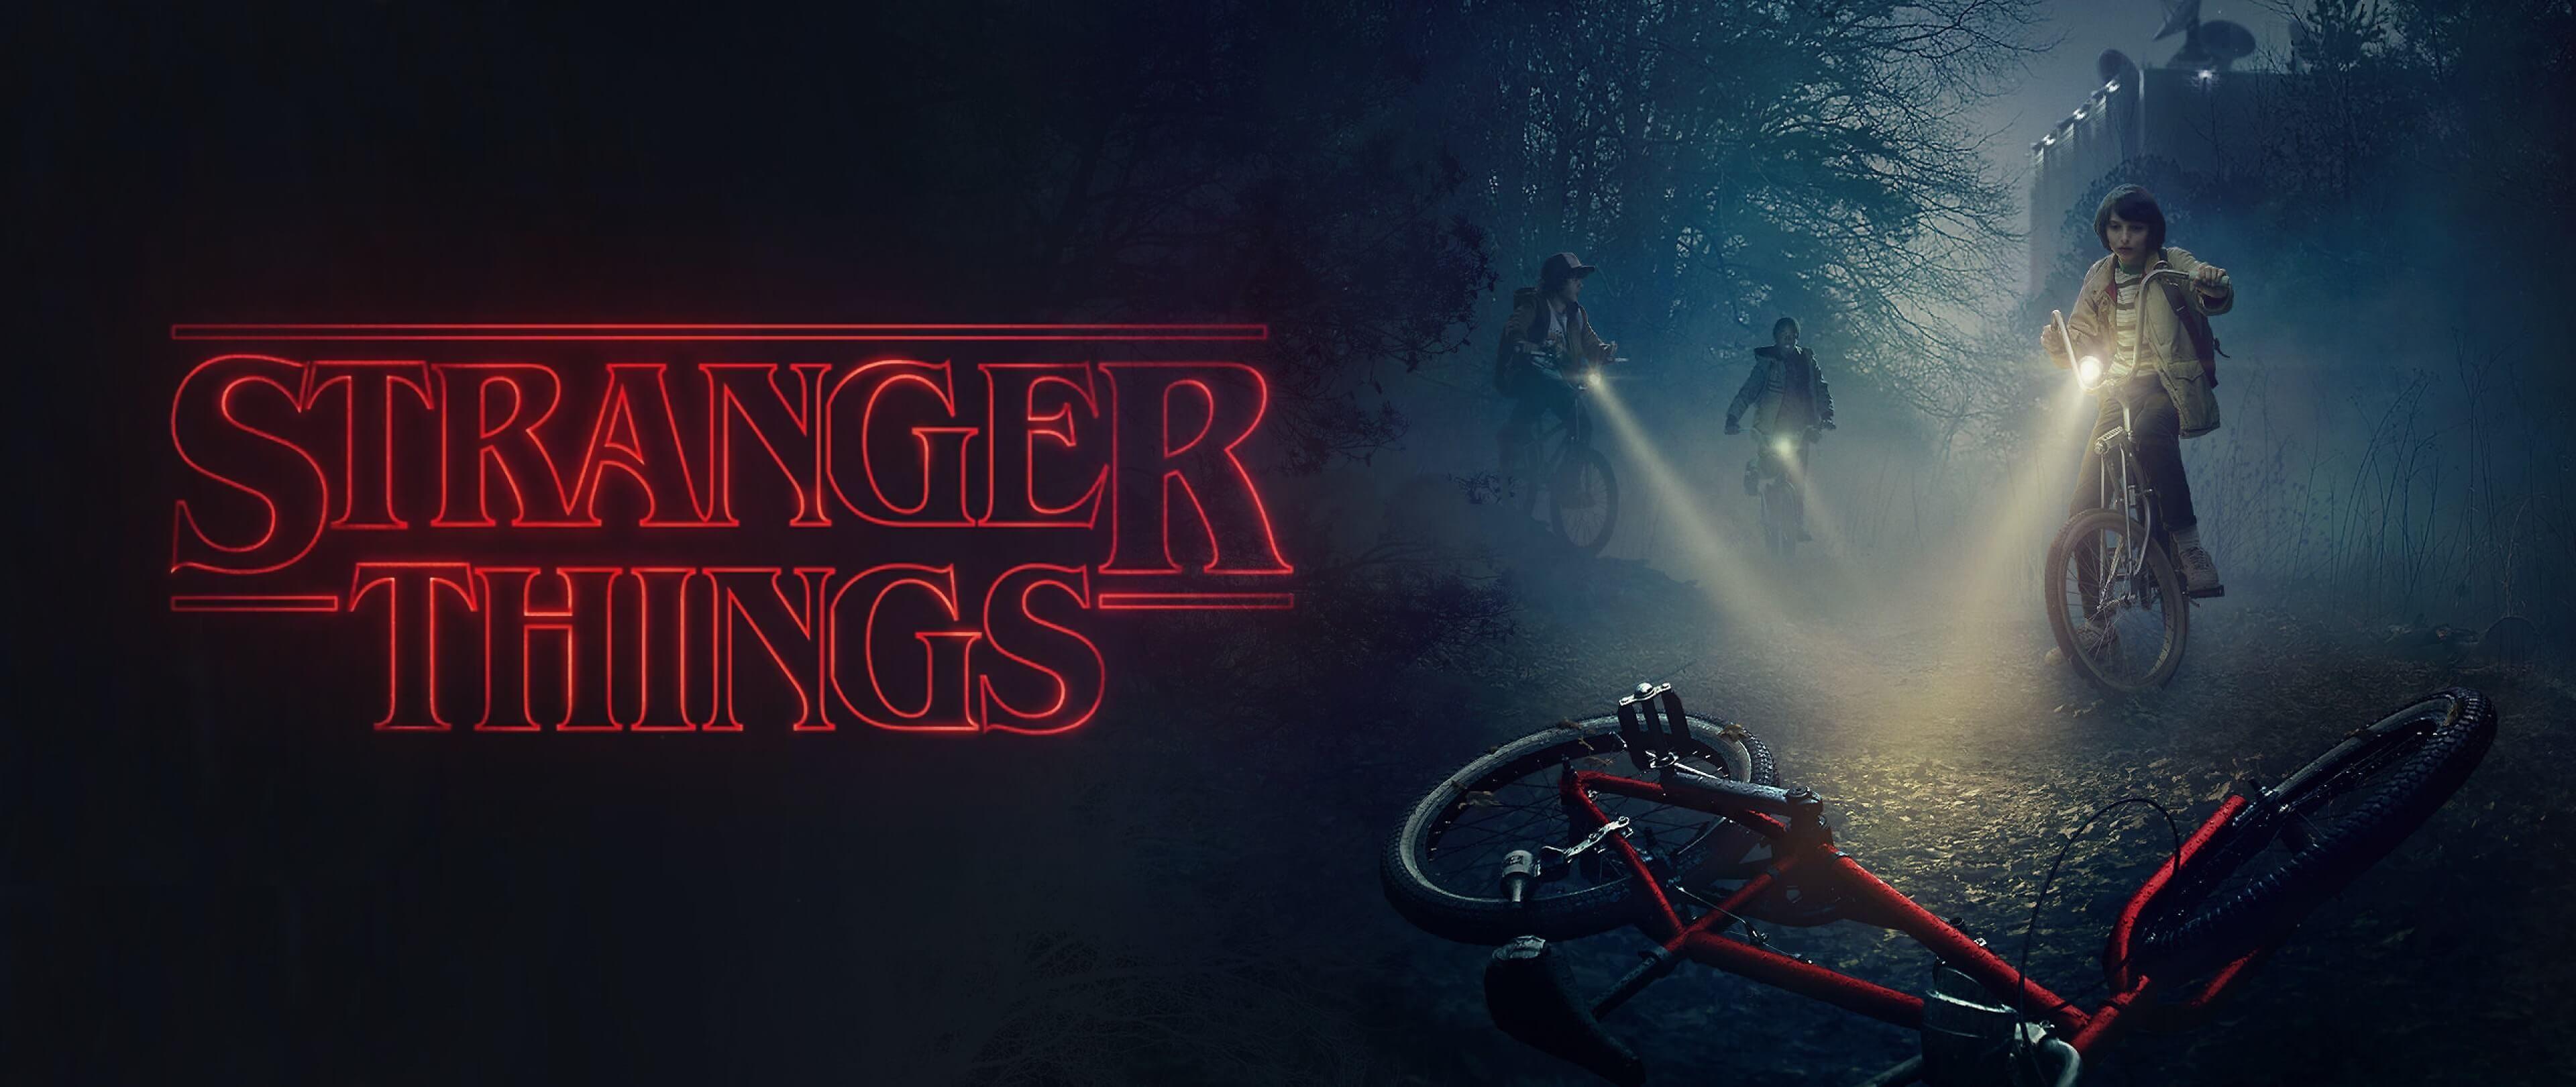 Demogorgon noodle from the other night tribute to Stranger Things show  reminded m  Stranger things characters Stranger things poster Stranger  things wallpaper